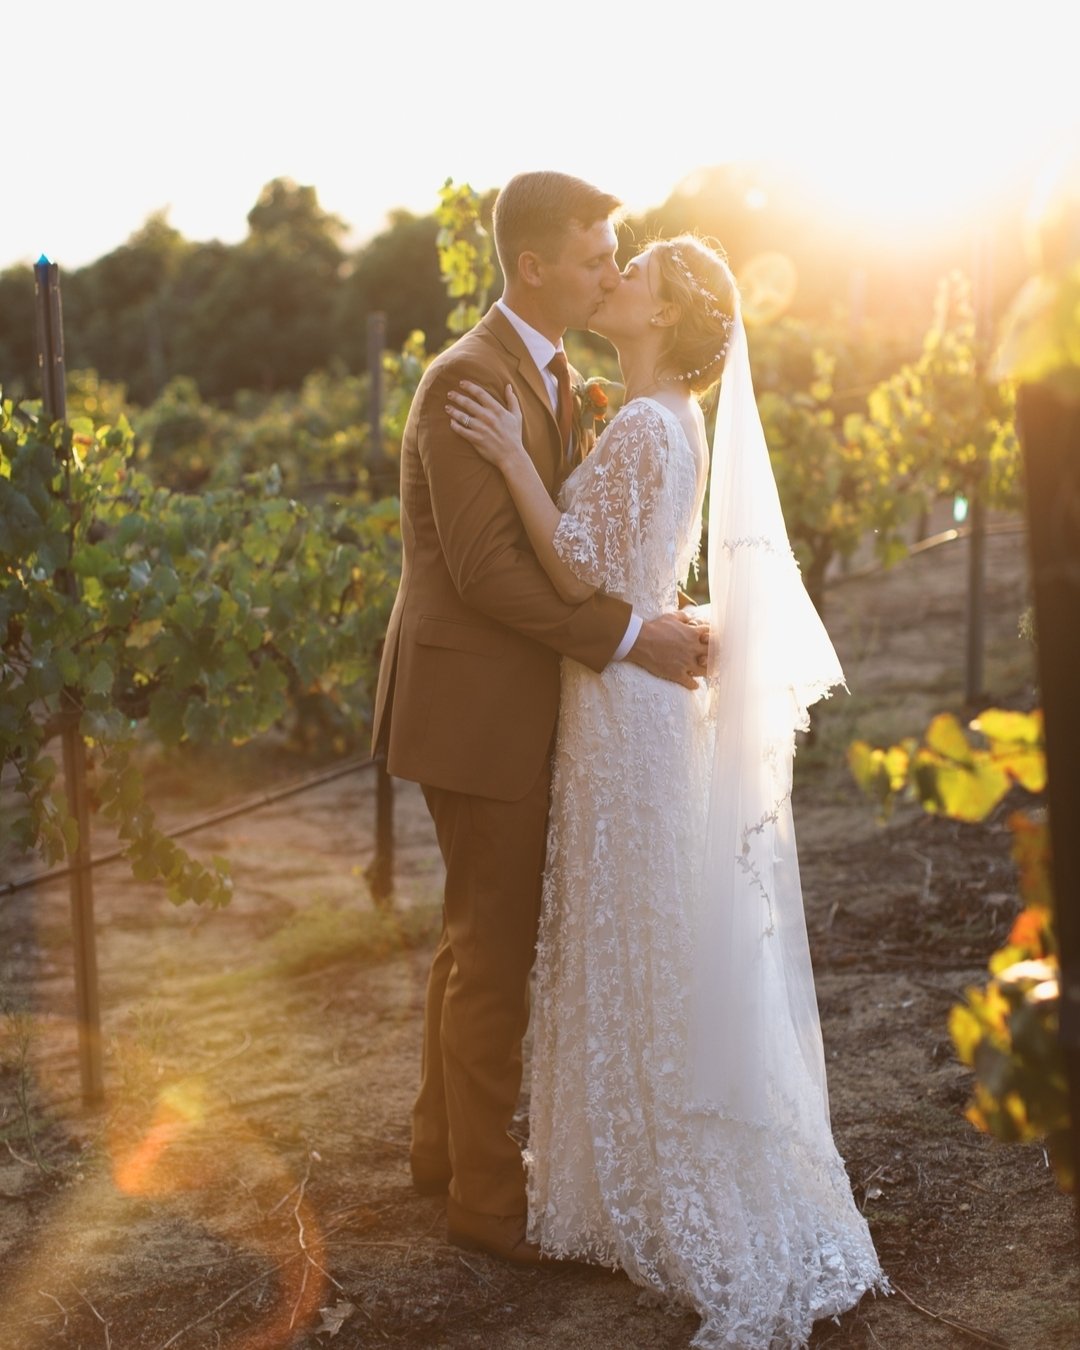 When the light hits just right ✨ Our vineyard is the perfect spot for those dreamy golden hour portraits!

Vendors:
@randhawaranchweddings
@joy_portinga
@sd_event_planning
@rusticurbanevents 
@joyjavacoffee
@hopsandgrainsmobile 
@totalqualitymusic 
@